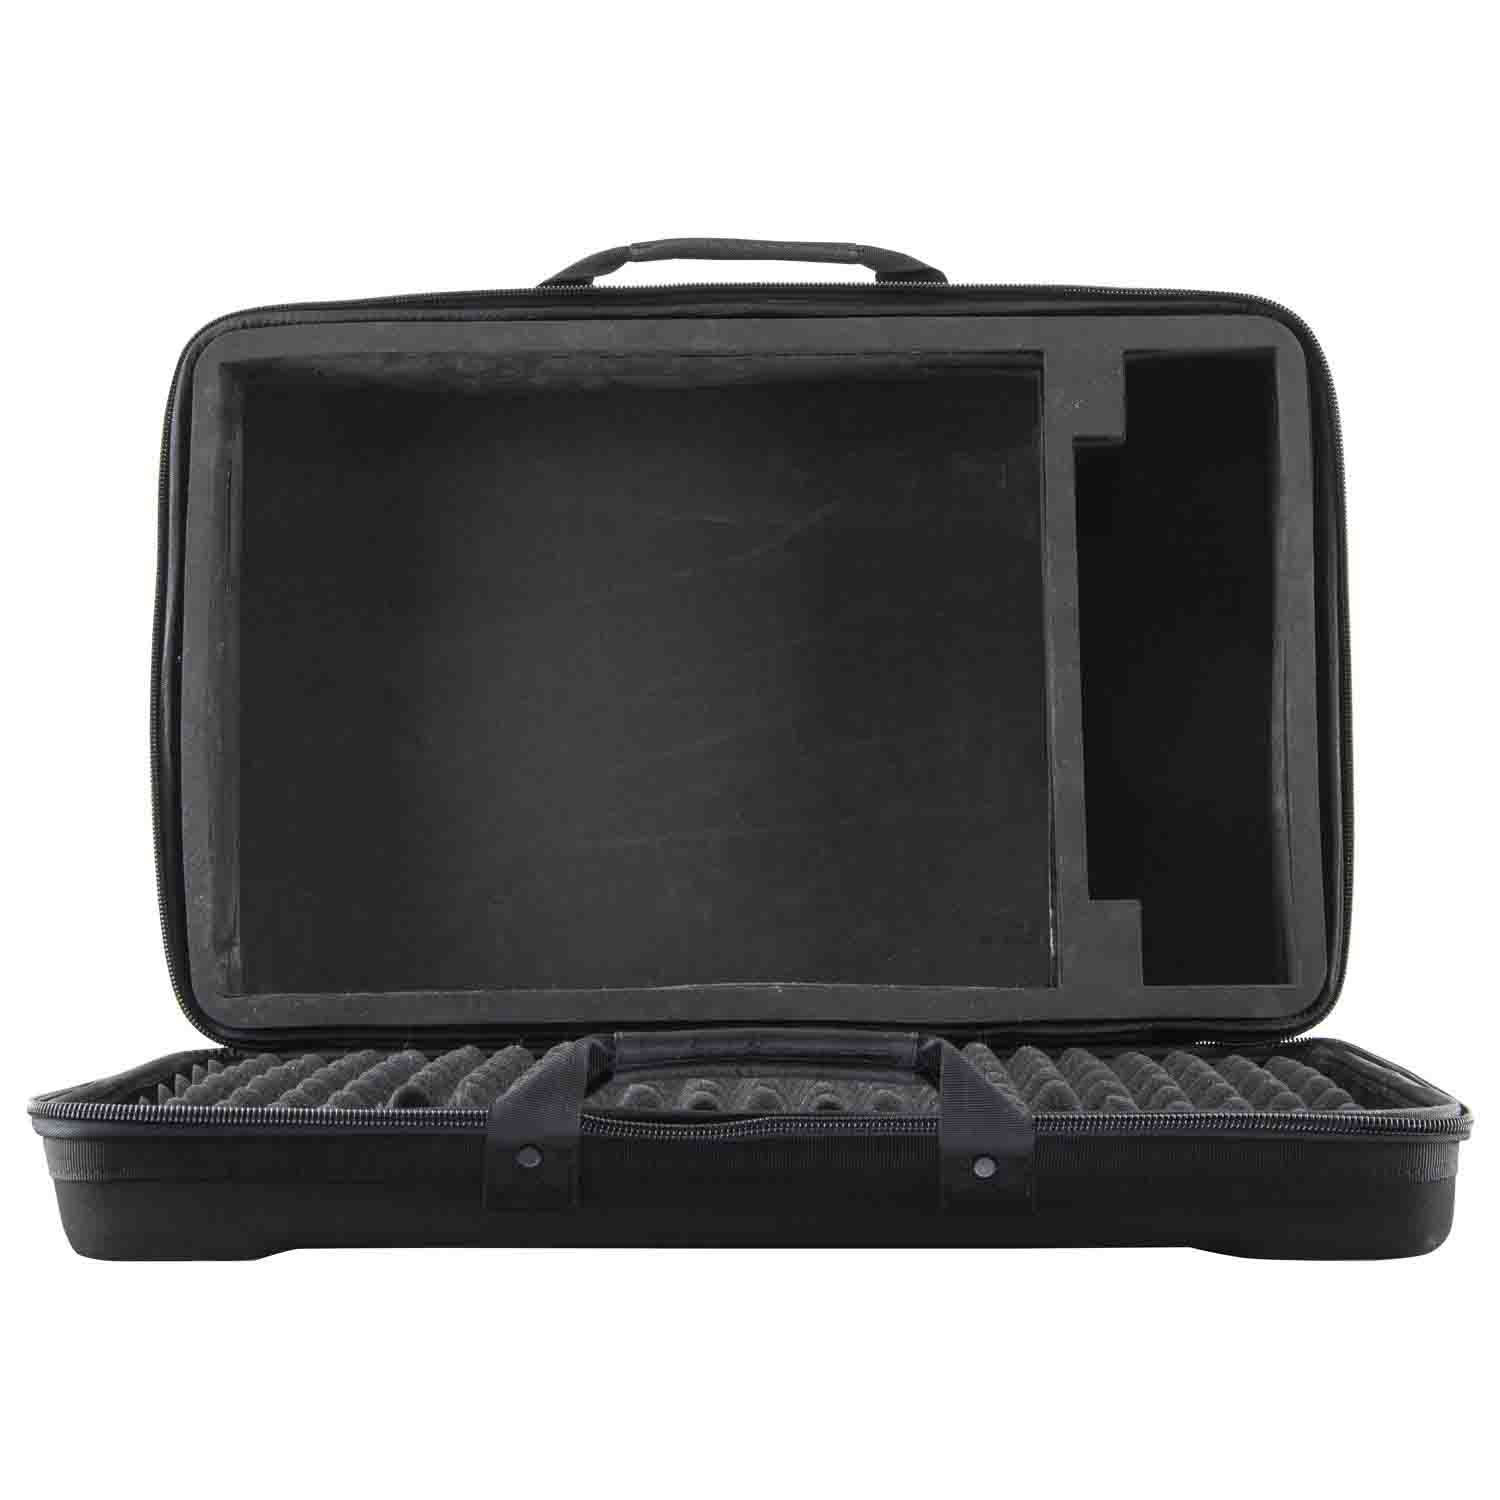 Odyssey BMPRIMEGODLX EVA Case with Cable Compartment for Denon Prime GO Standalone DJ System - Hollywood DJ